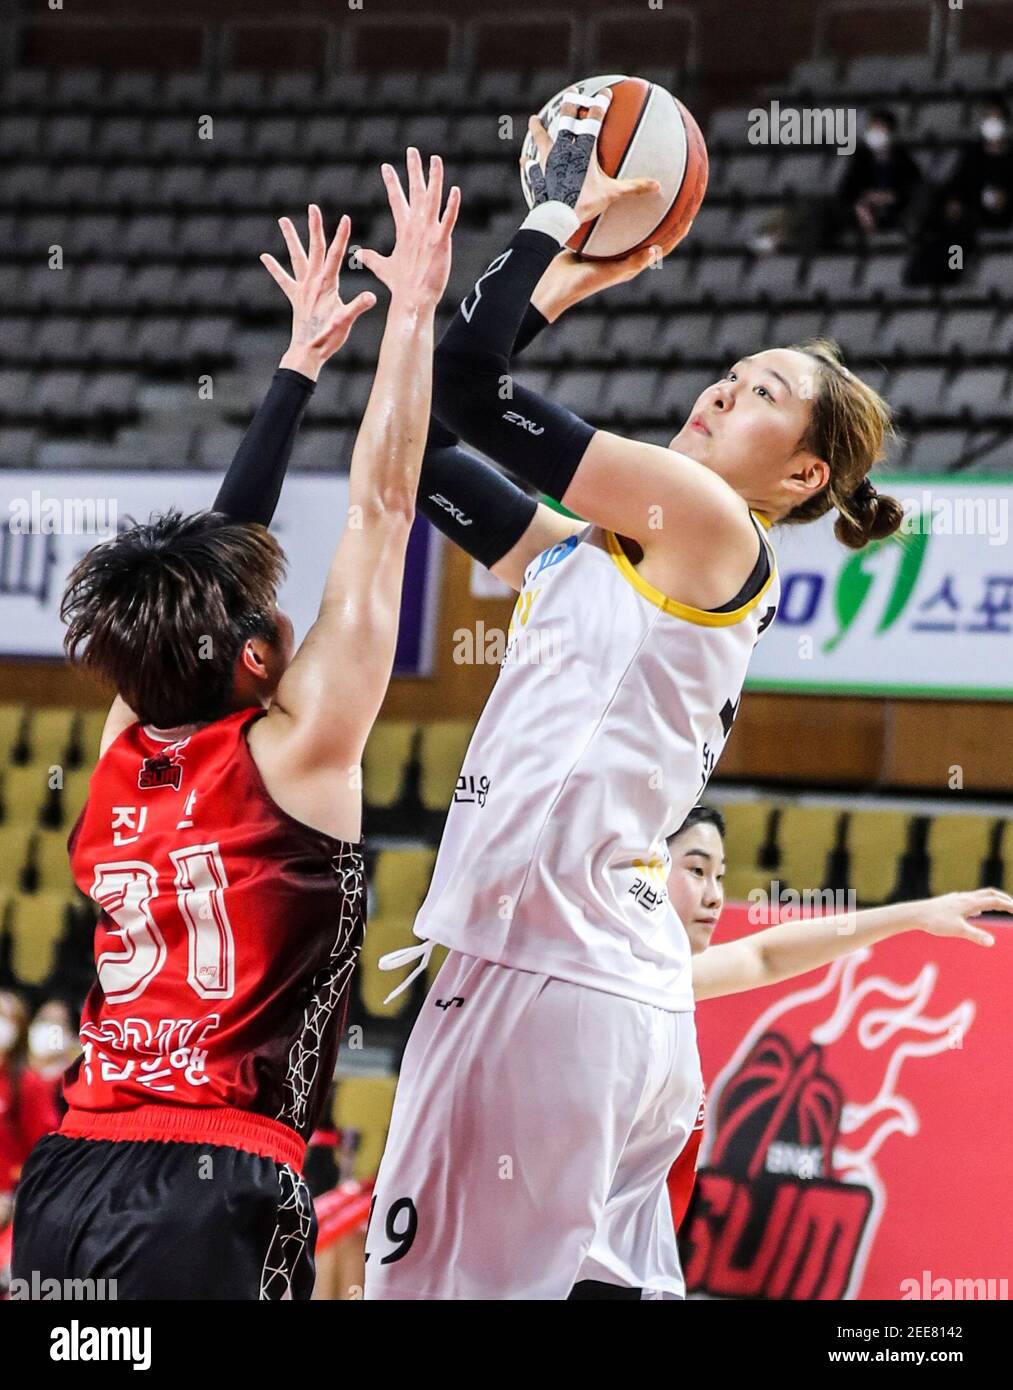 16th Feb, 2021. Park Ji-soo in action Park Ji-soo (R) of the KB Stars goes  up for a shot during a game of the Women's Korean Basketball League against  the BNK Sum